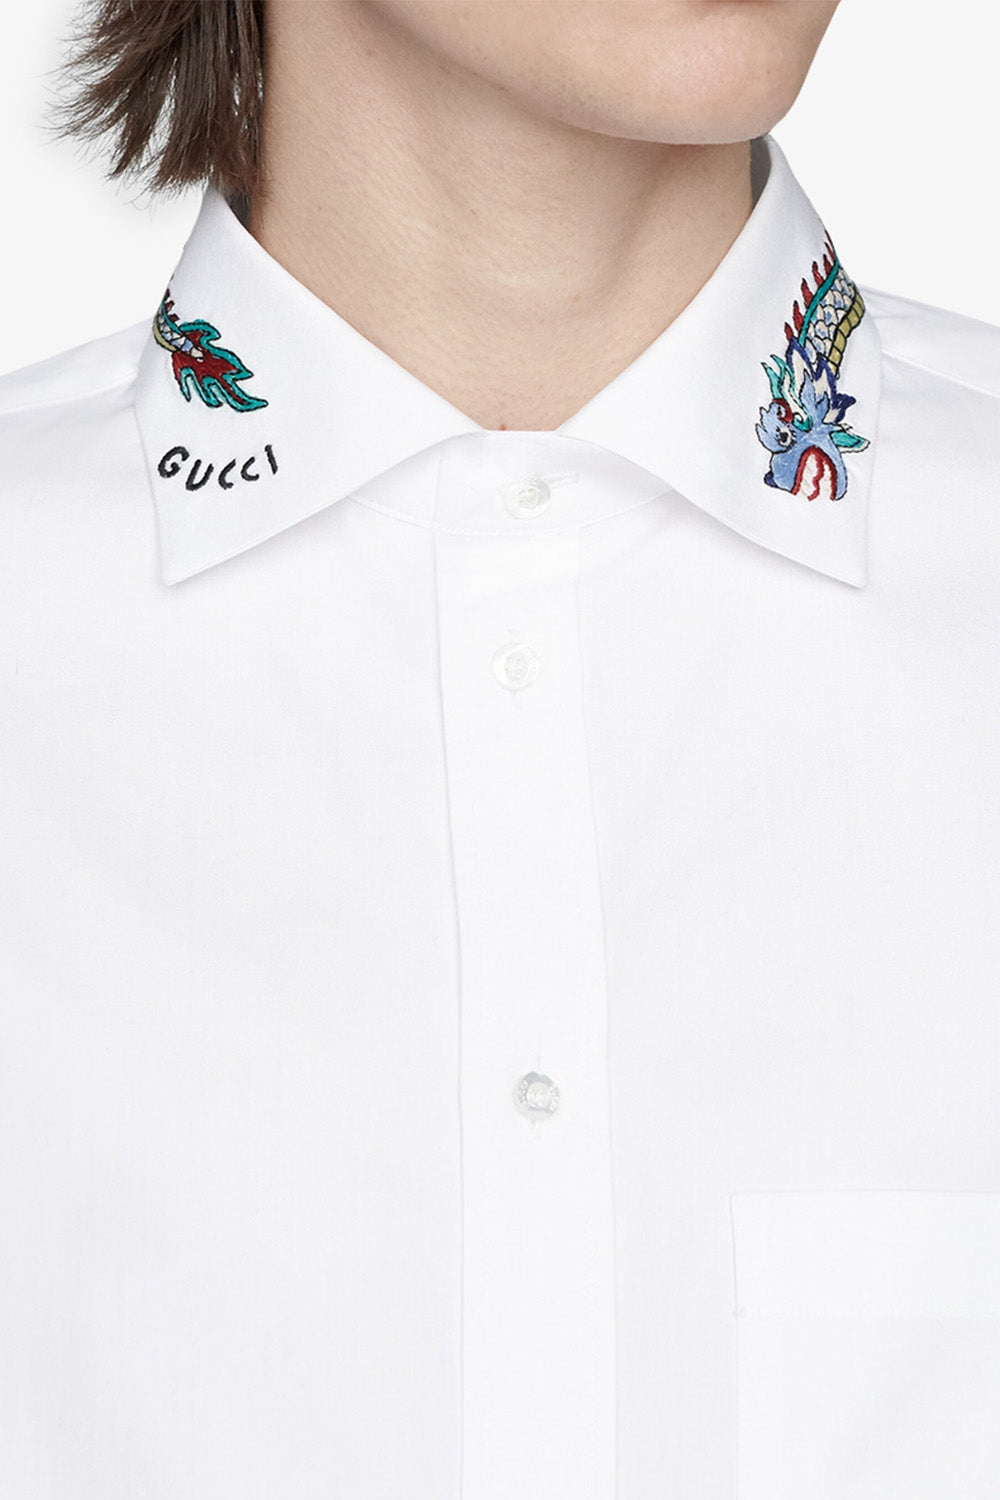 Gucci Cotton shirt with embroidered collar